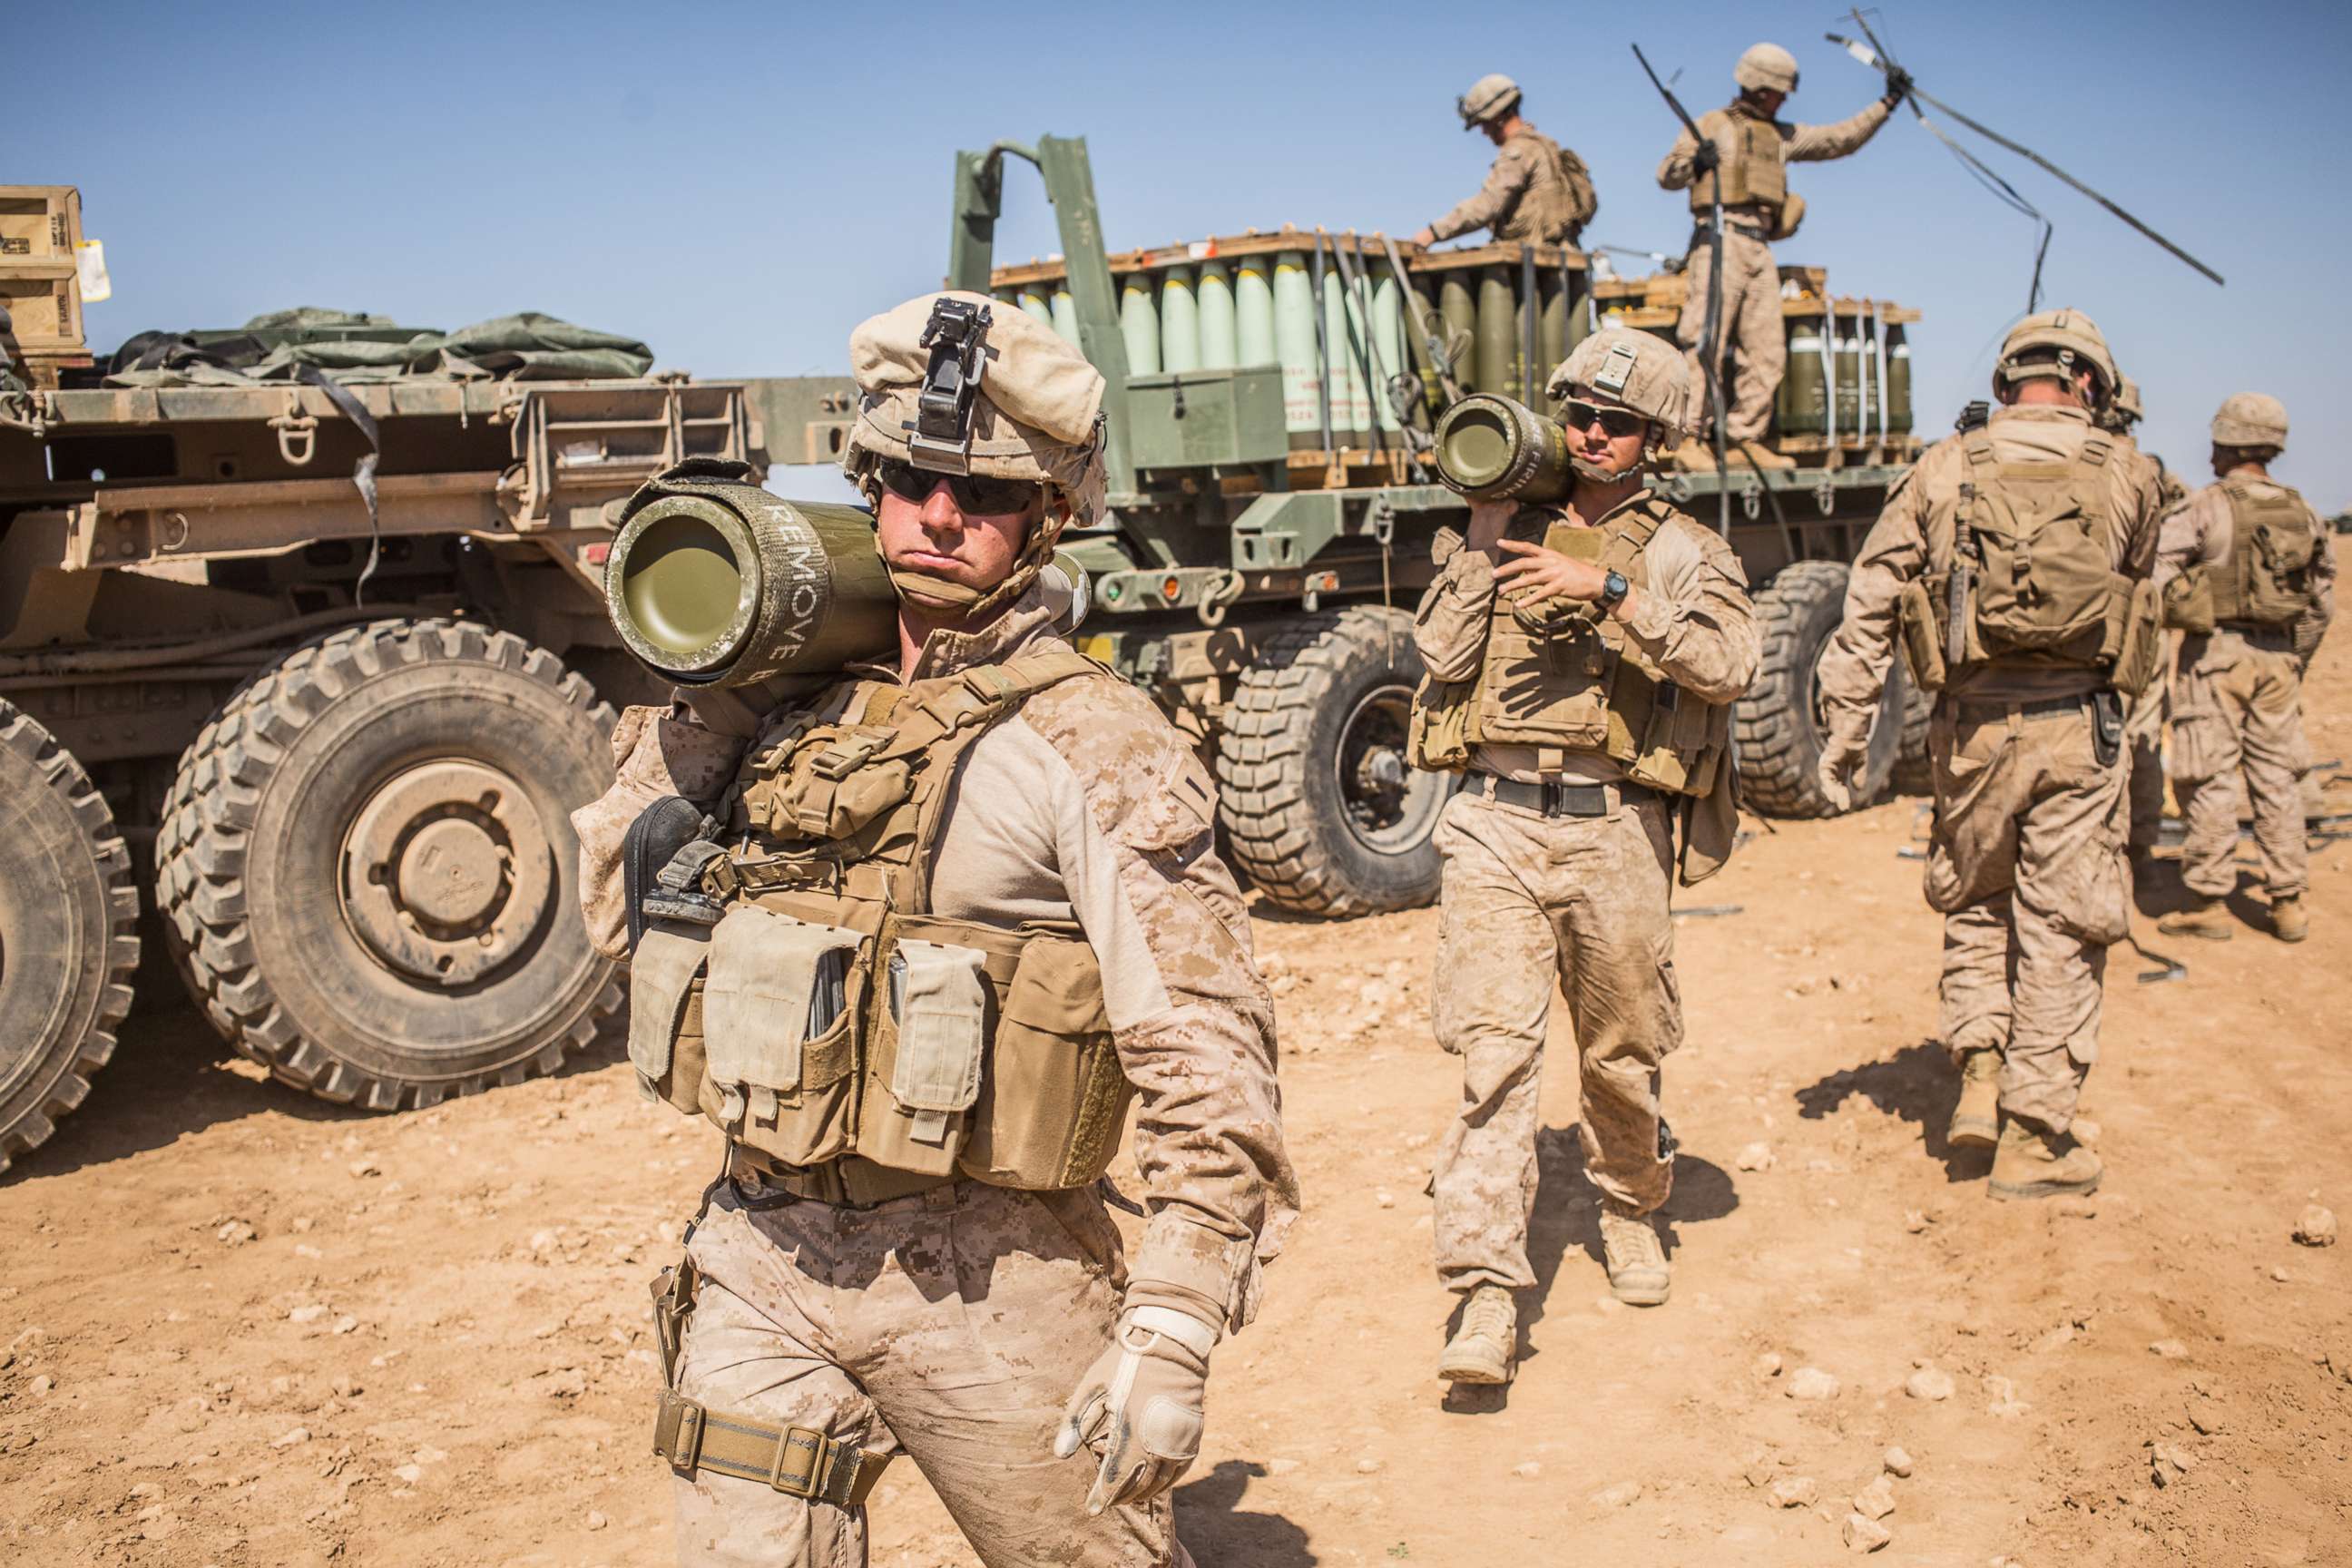 PHOTO: U.S. Marines with the 11th Marine Expeditionary Unit carry rounds to an M777 Howitzer gun line in preparation for fire missions in northern Syria as part of Combined Joint Task Force - Operation Inherent Resolve, Mar. 21, 2017.